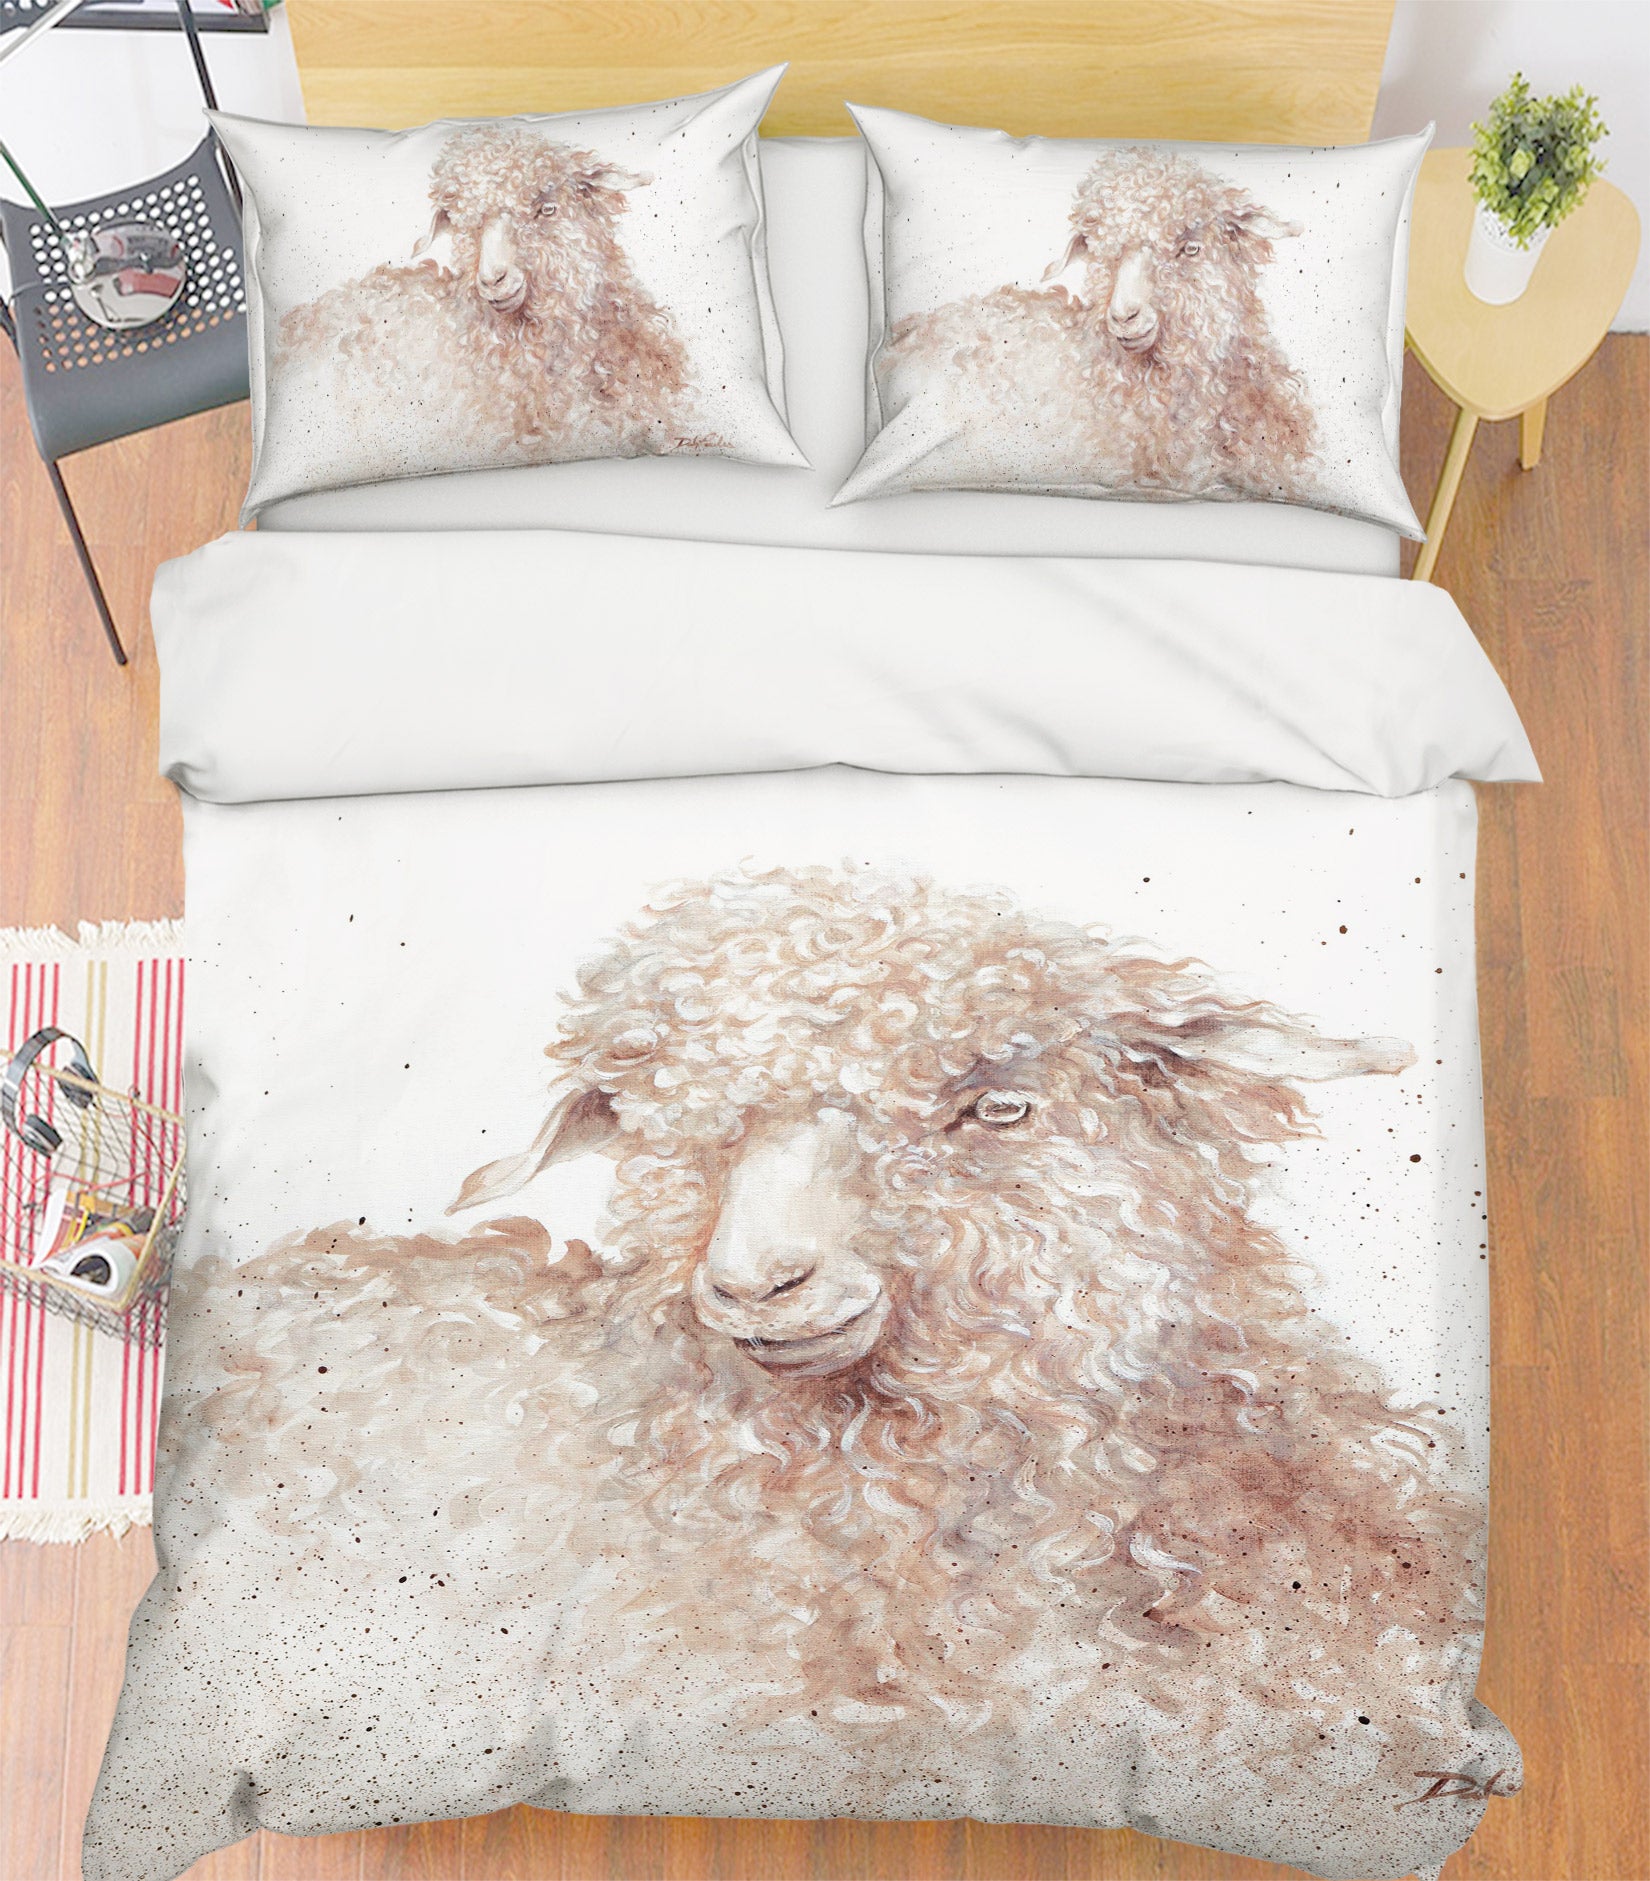 3D Sheep 2143 Debi Coules Bedding Bed Pillowcases Quilt